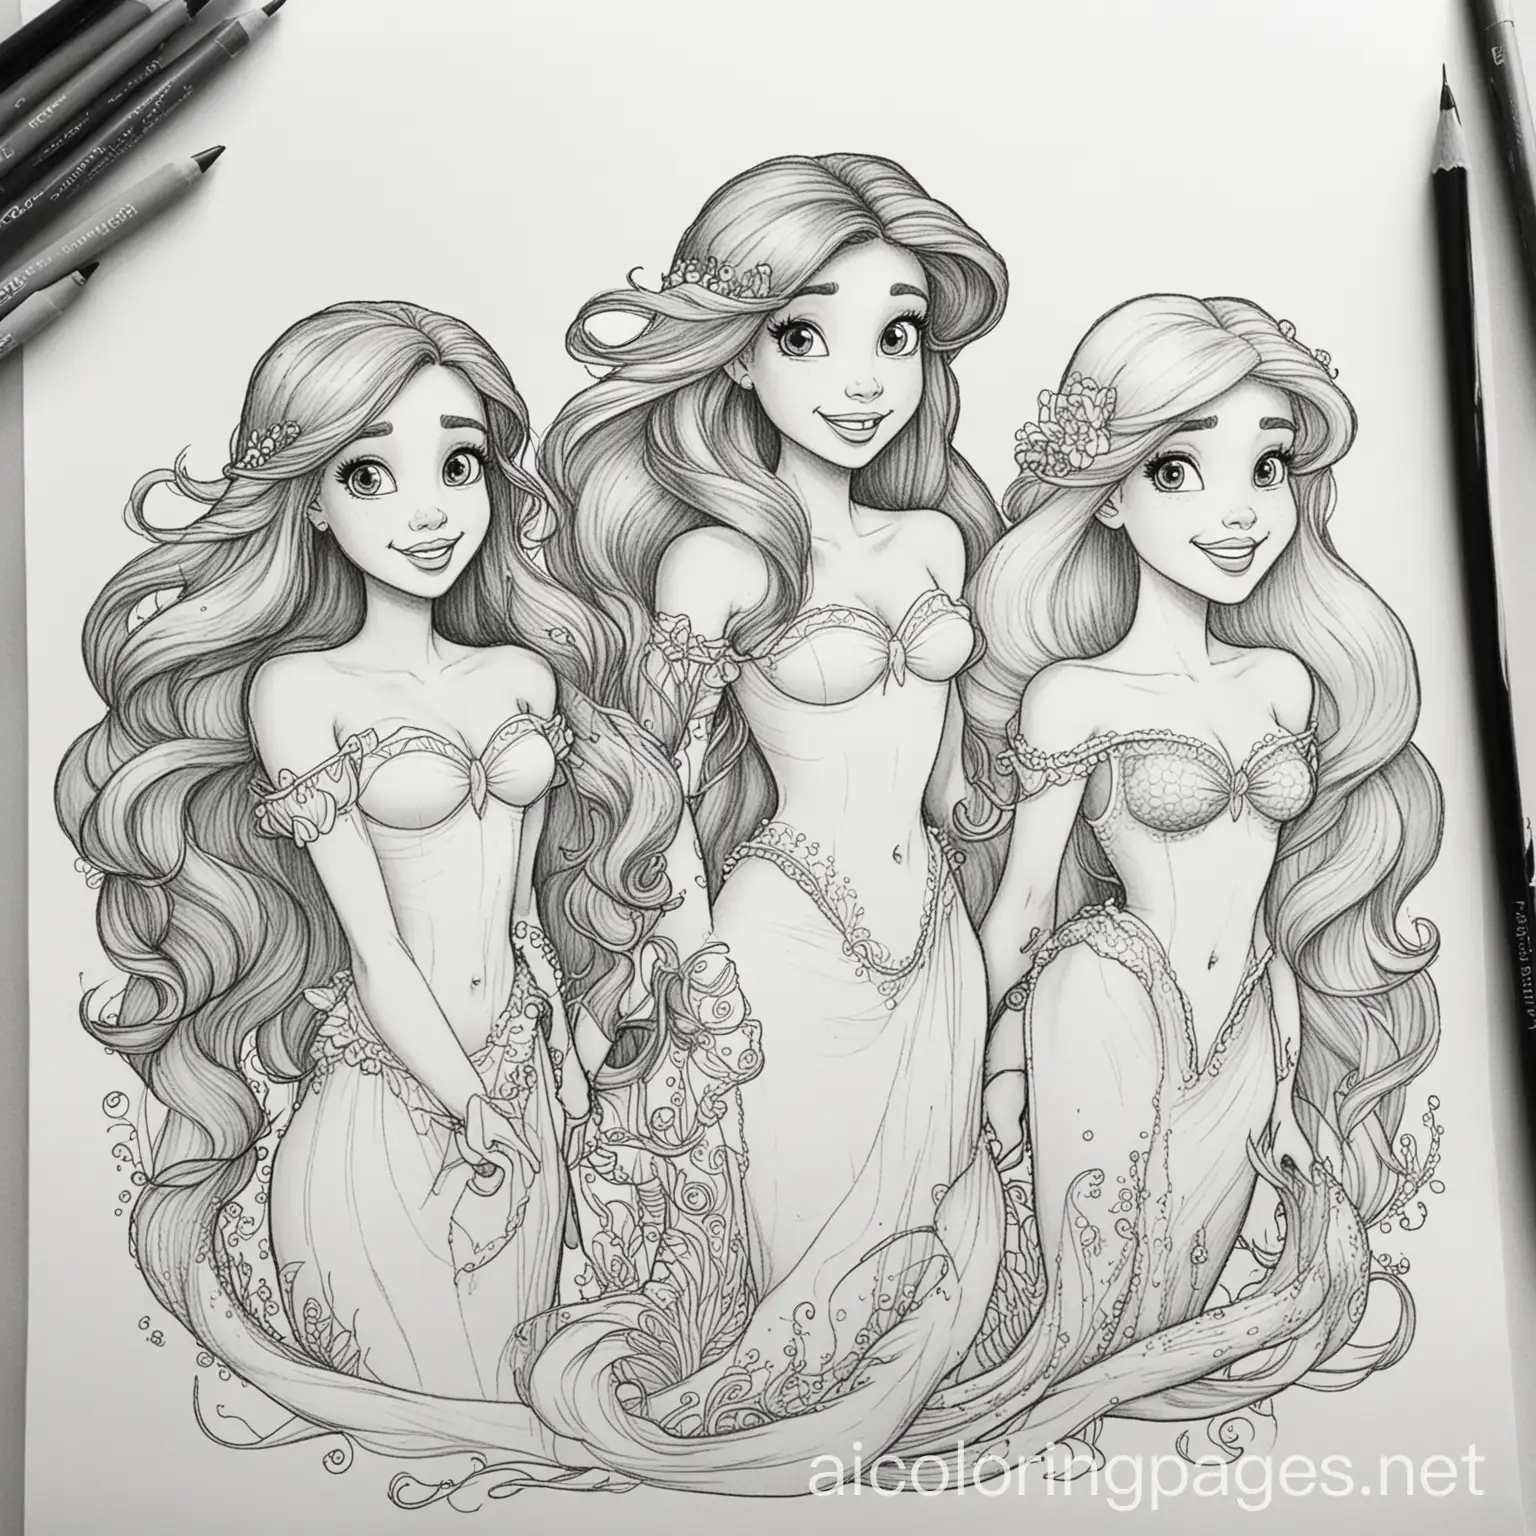 Ariel, the little mermaid, and her sisters, Coloring Page, black and white, line art, white background, Simplicity, Ample White Space.